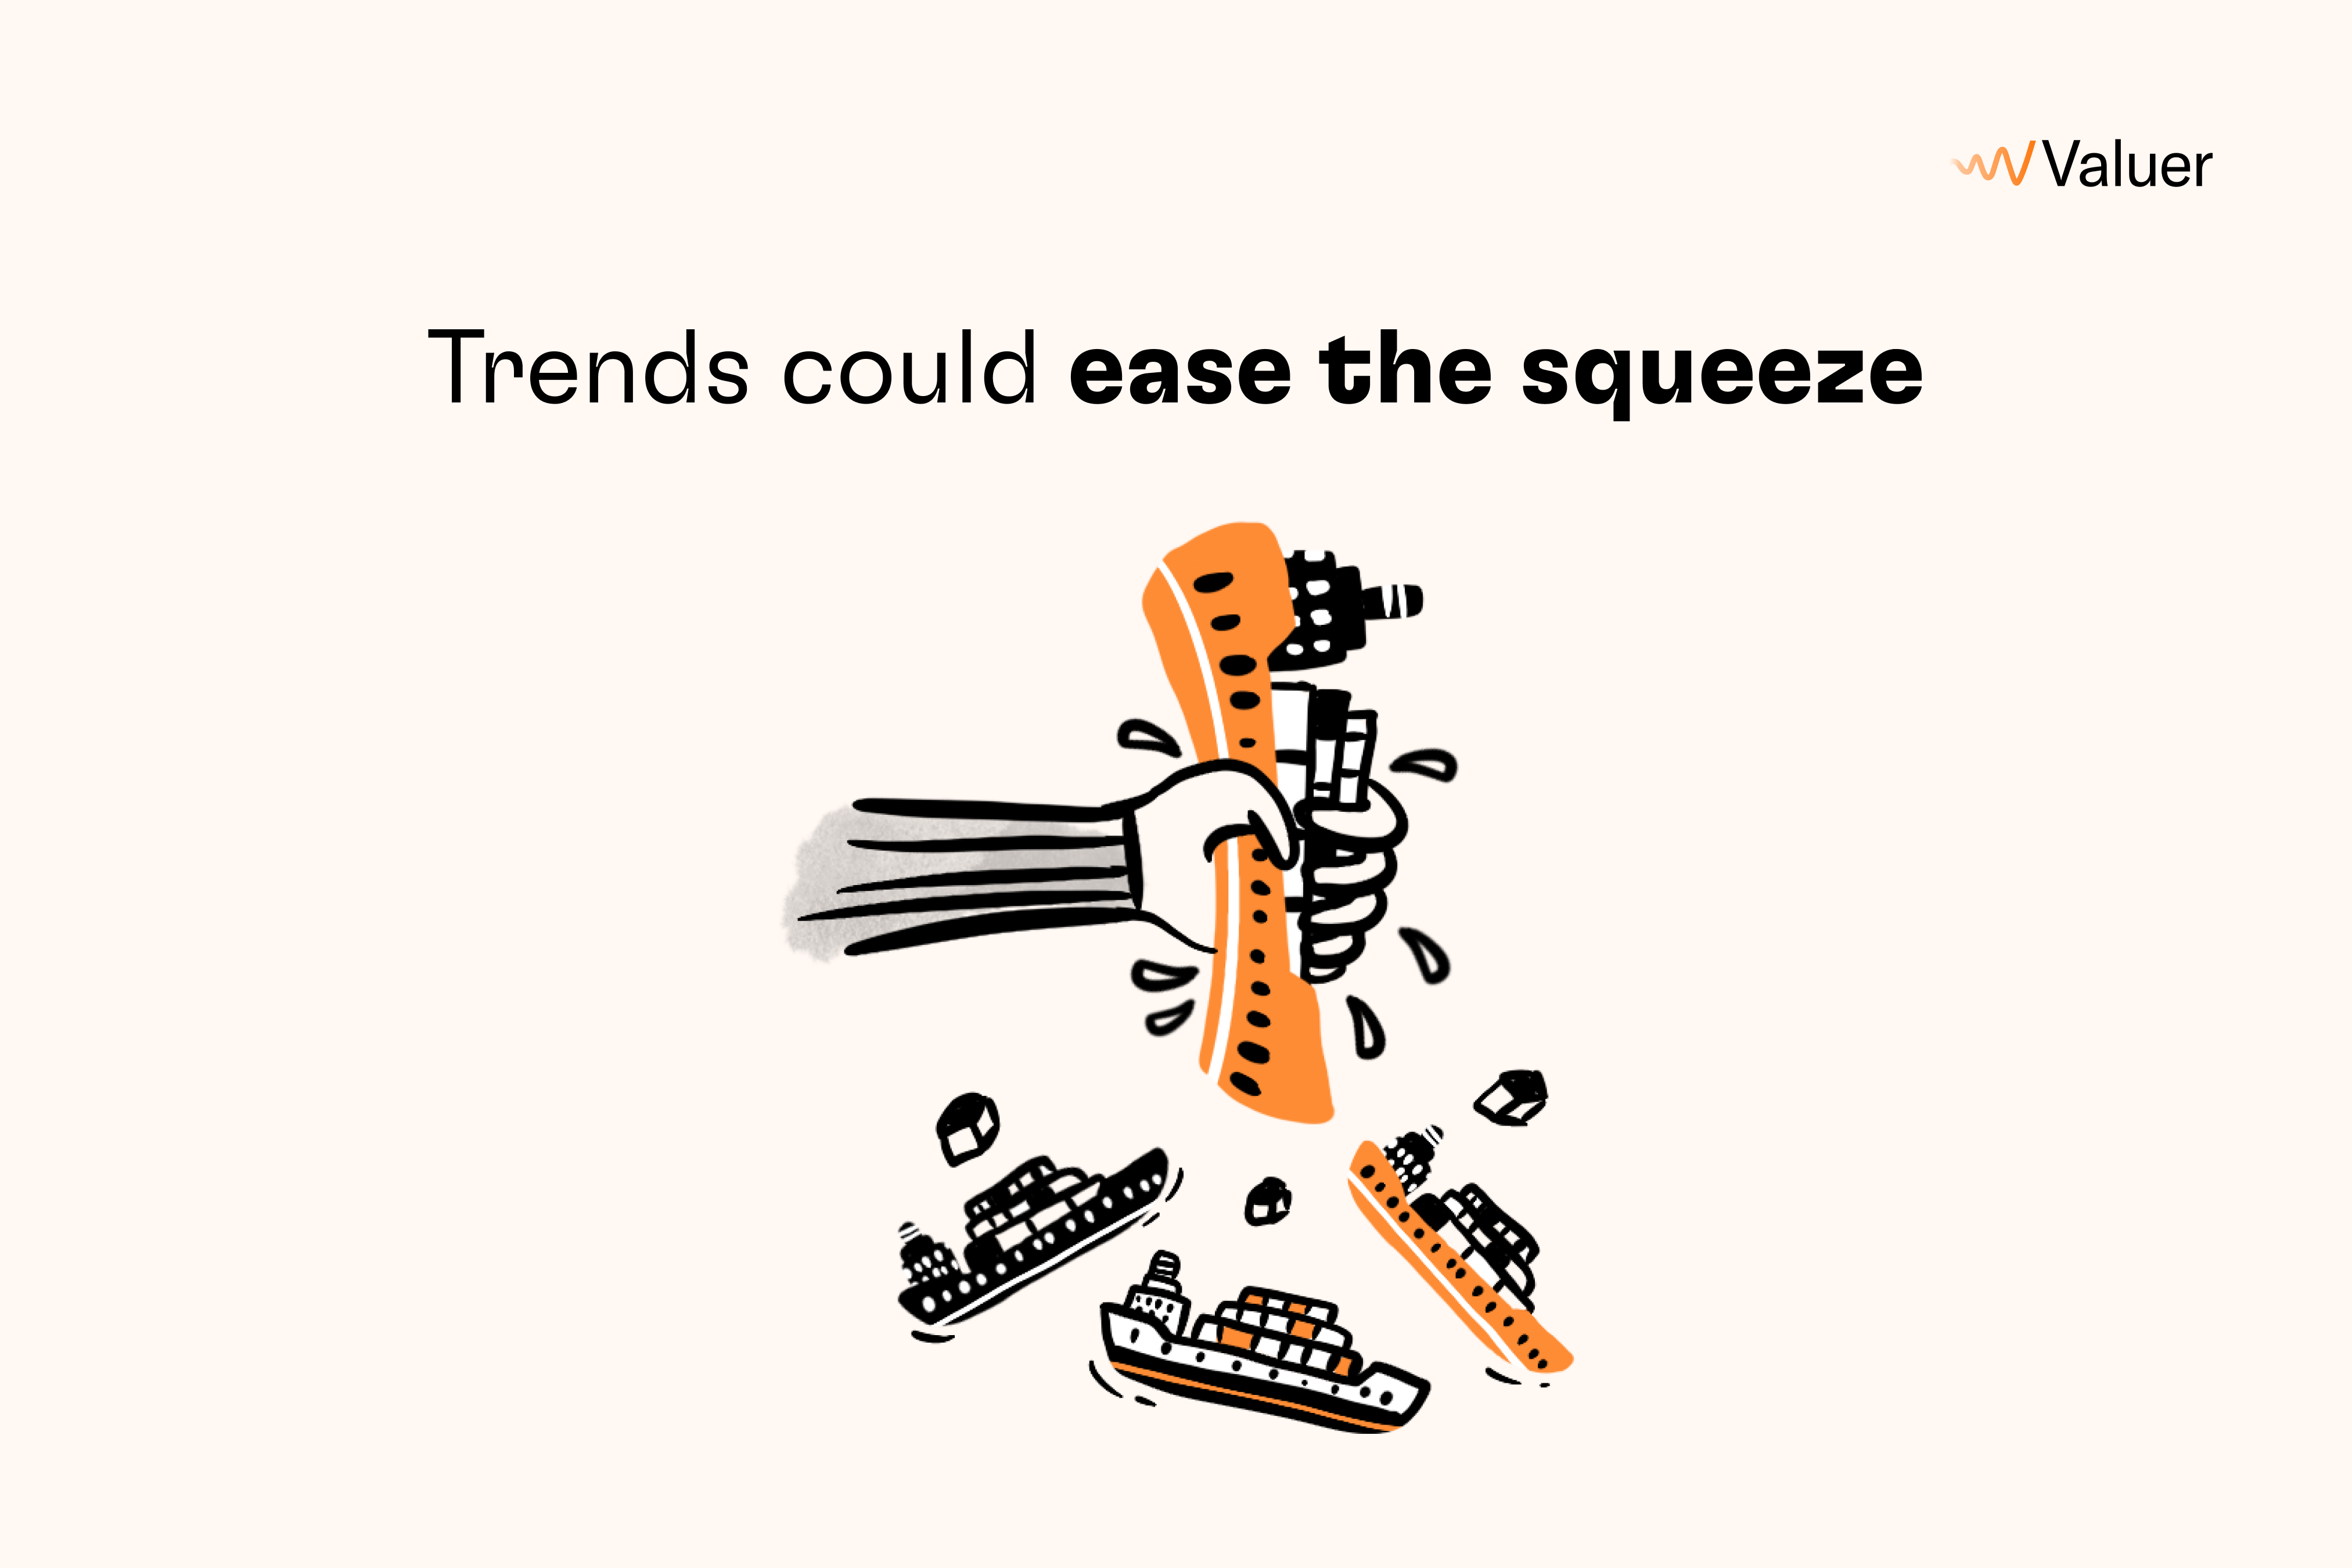 Trends could ease the squeeze